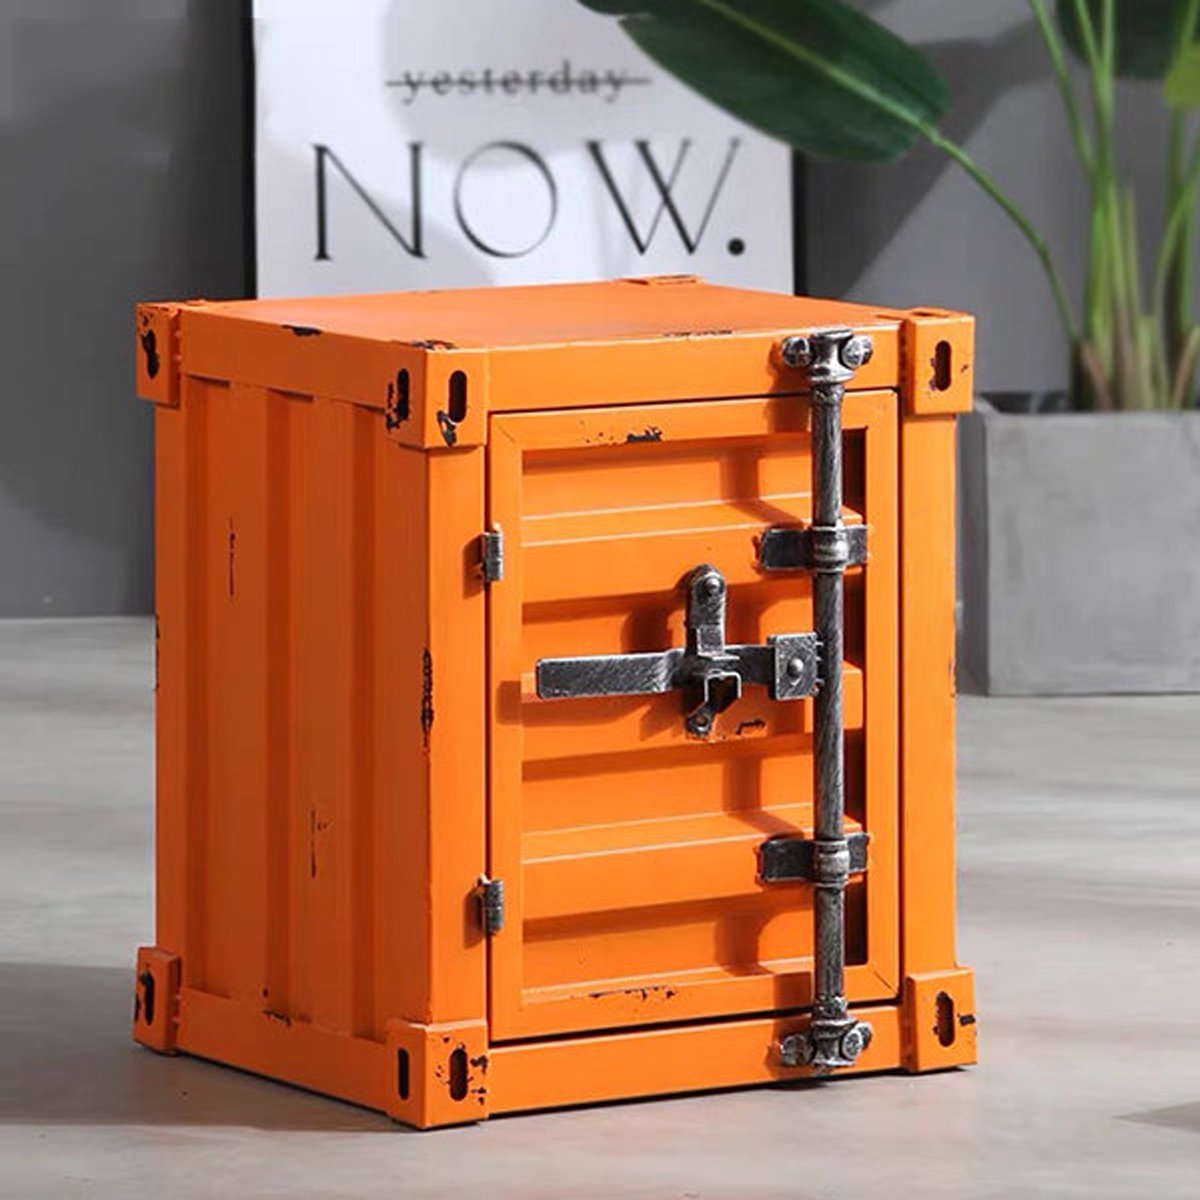 Retro Industrial Style Mini Shipping Container Table With Lockable Handle Orange – By CGC Interiors